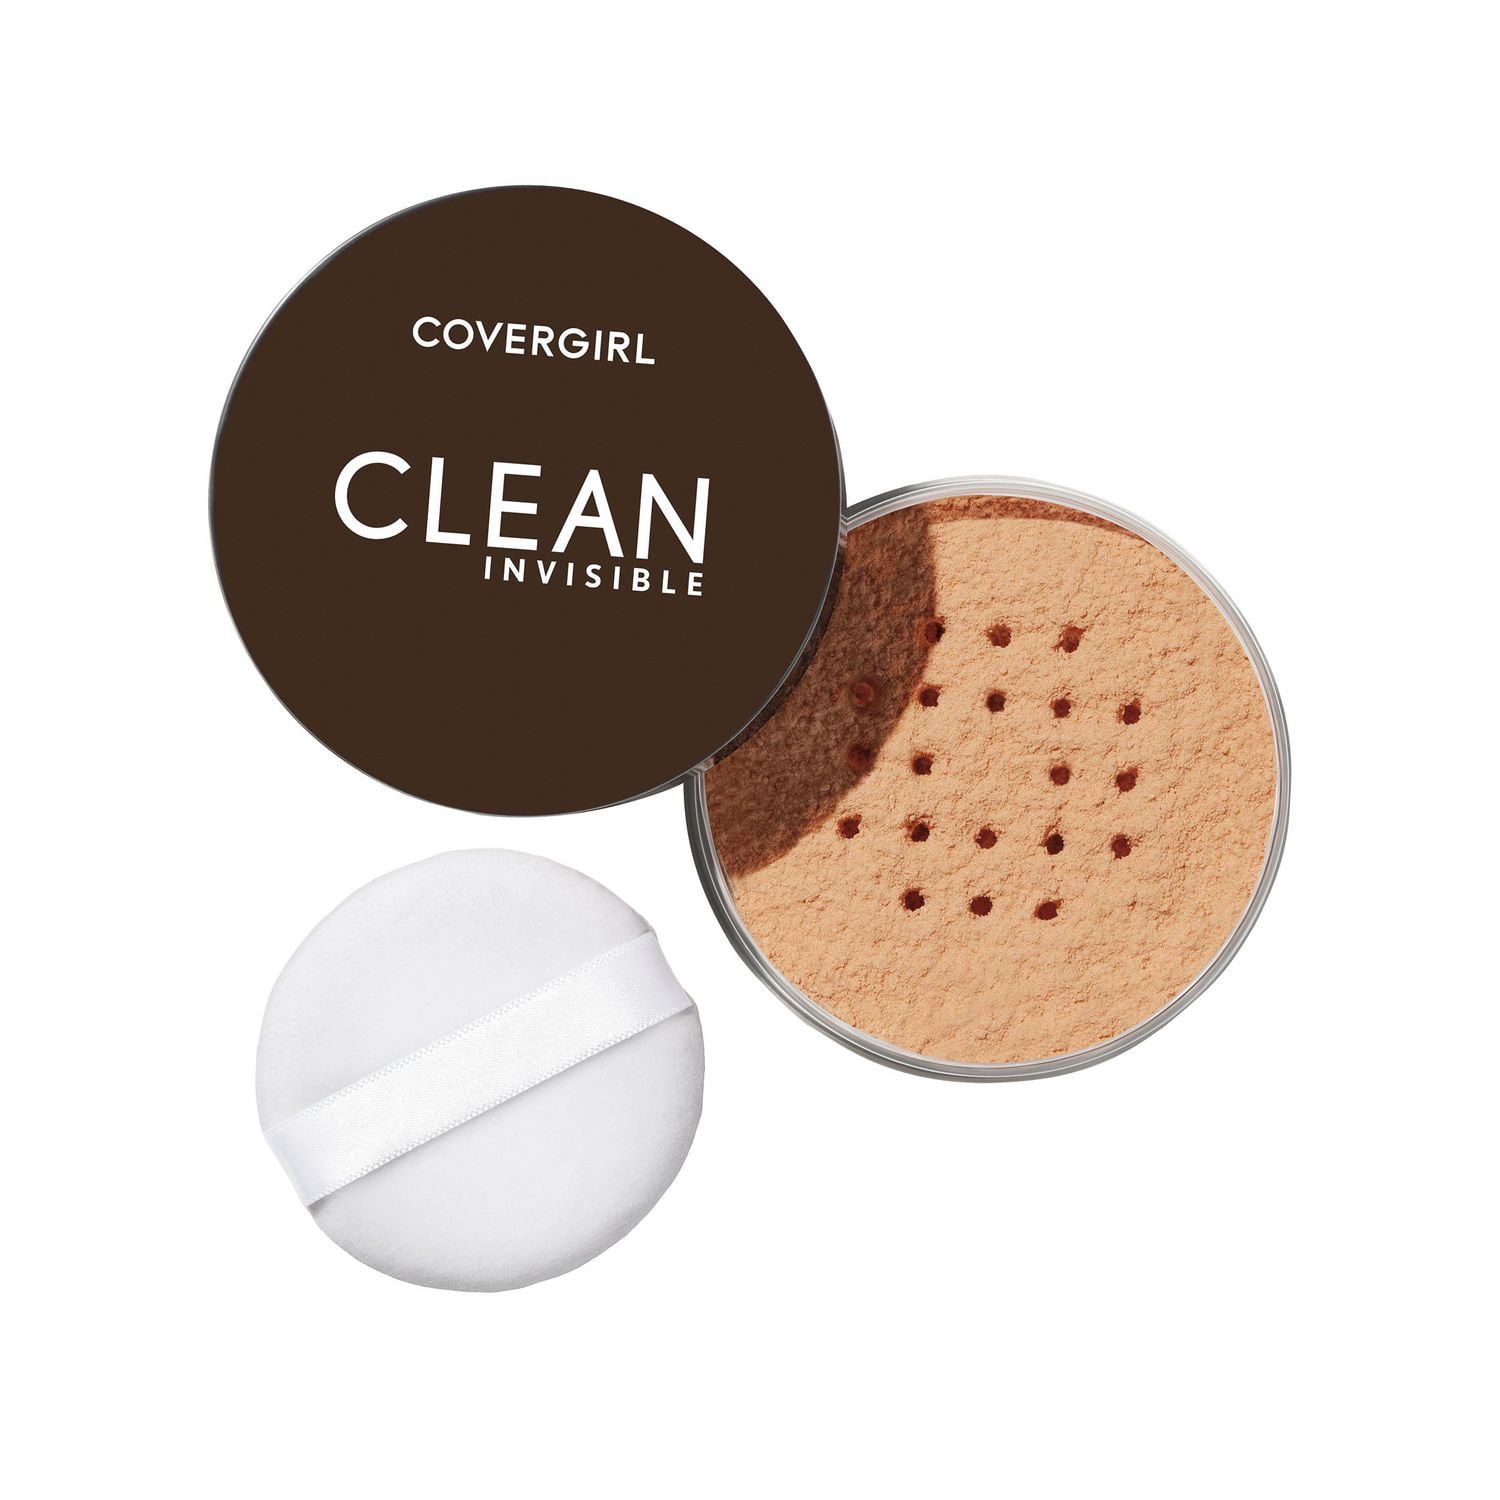 COVERGIRL Clean Invisible Loose Powder, 100% natural origin pigments & only  15 essential non-clogging ingredients, lightweight, breathable formula